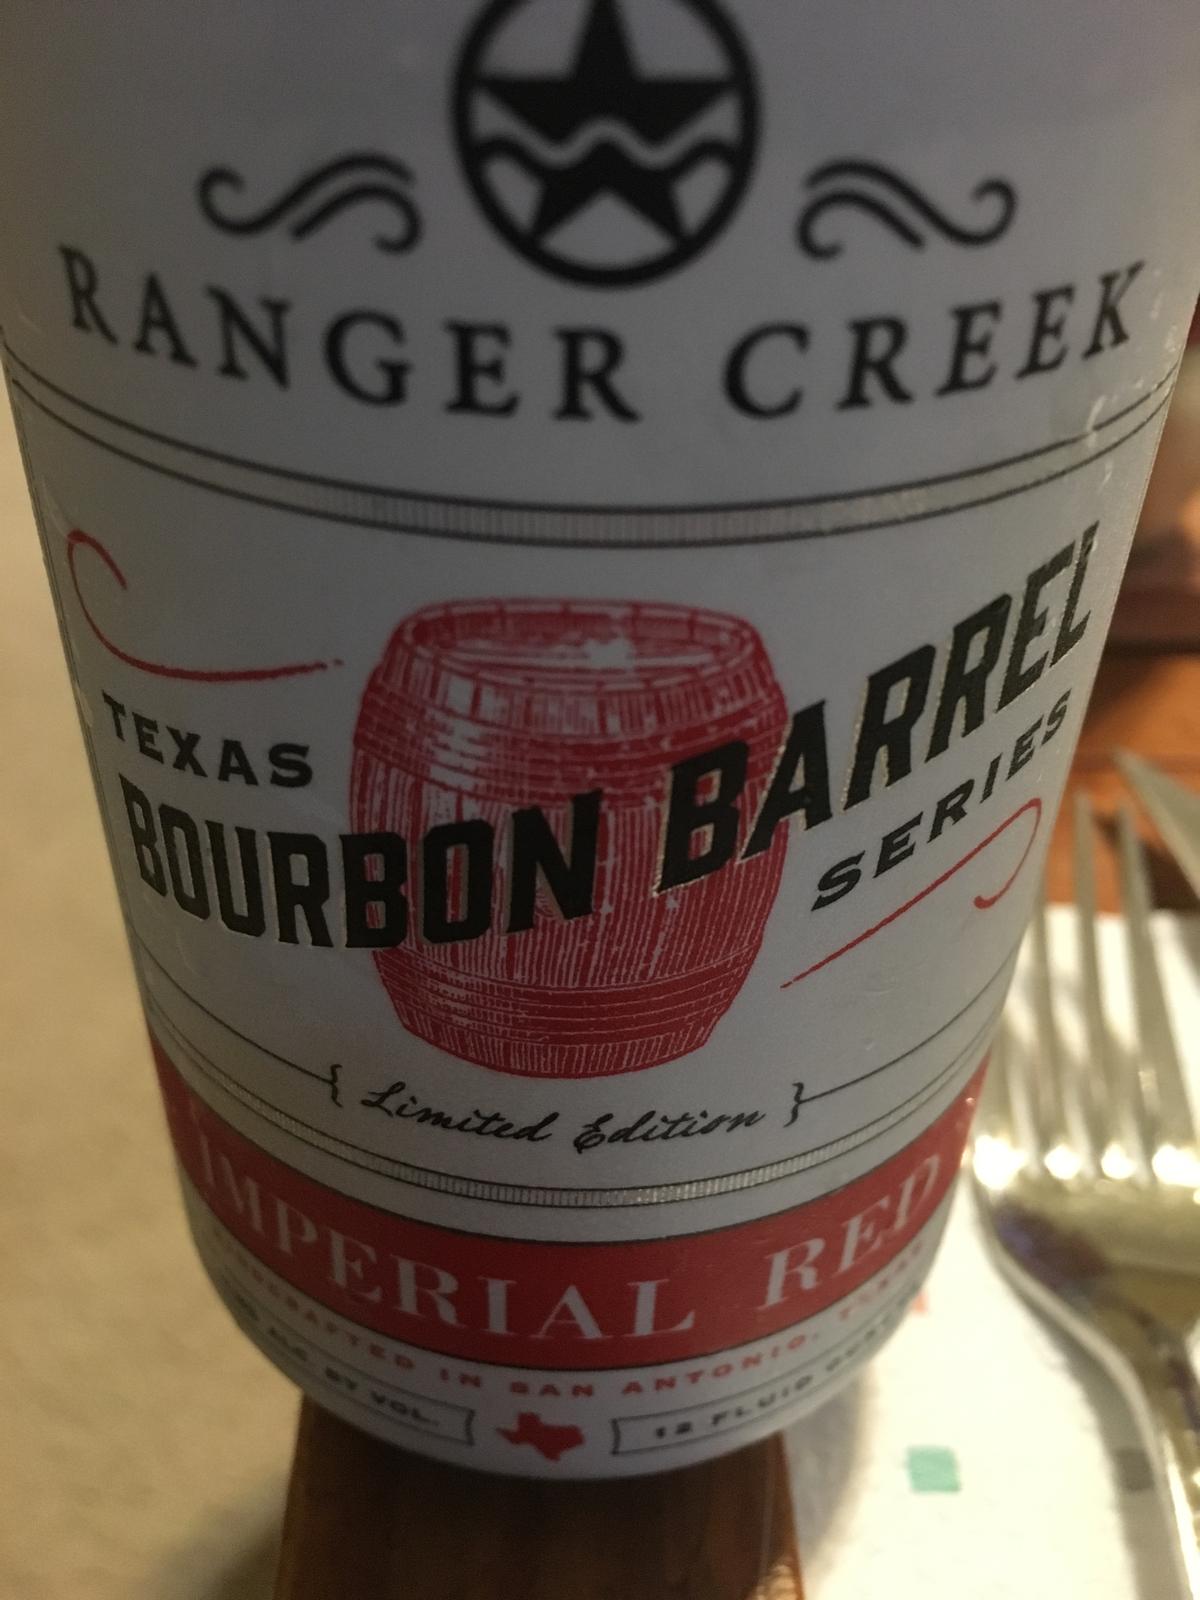 Texas Bourbon Barrel Series: Imperial Red